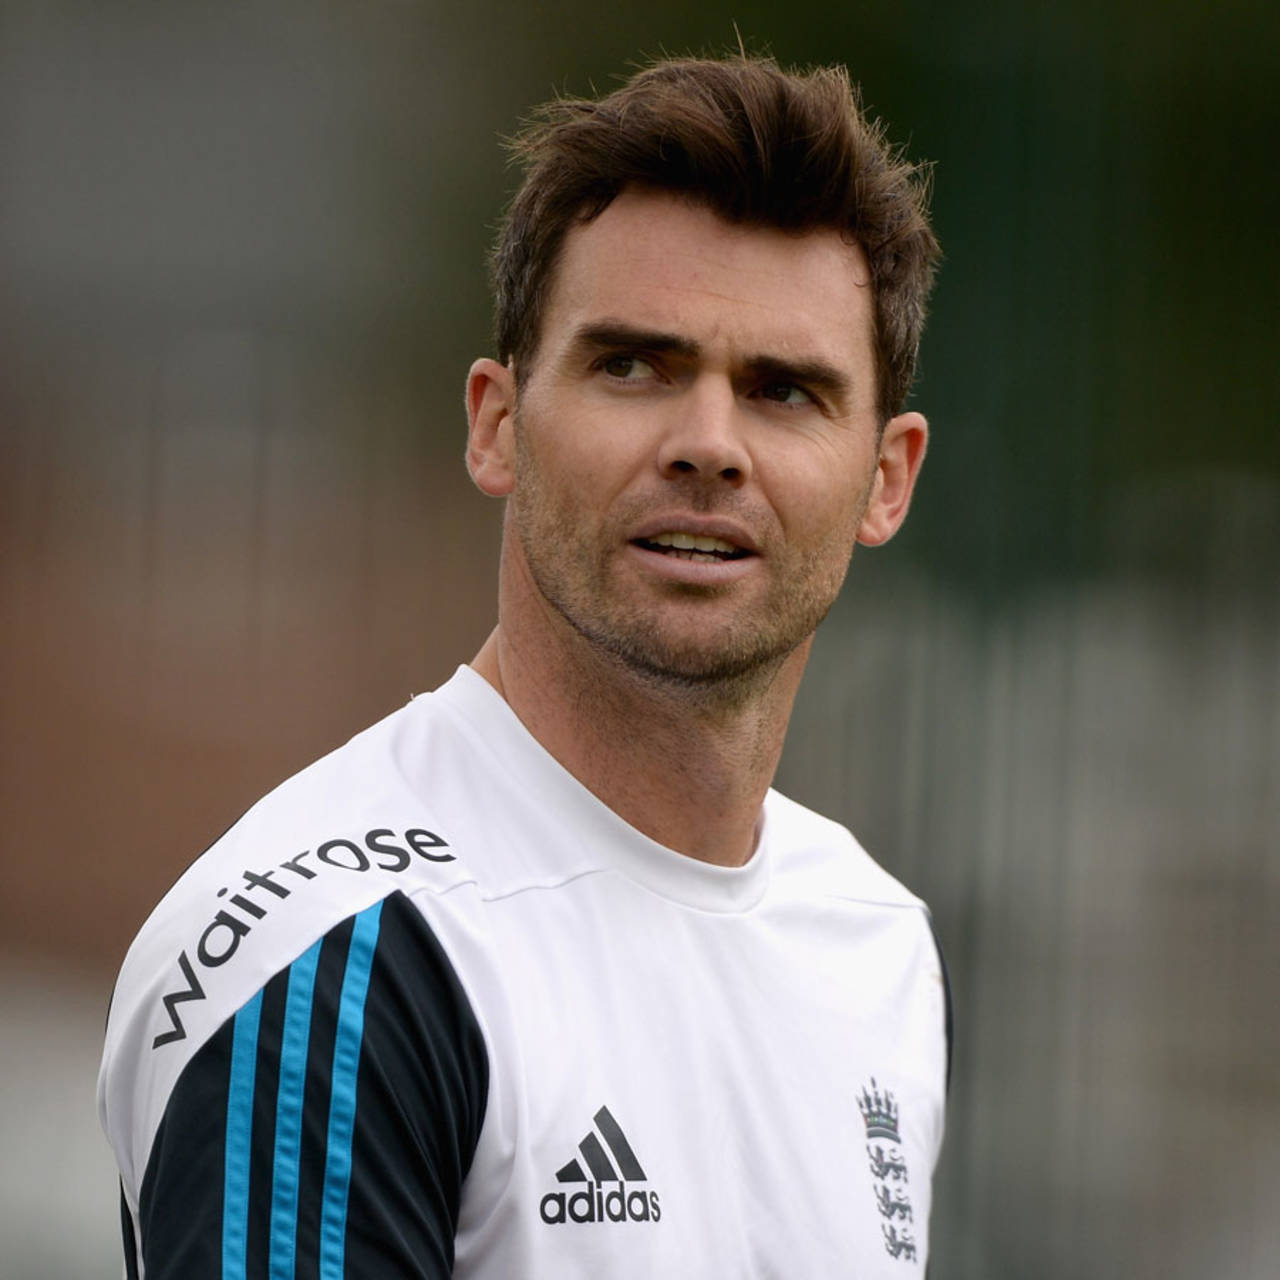 James Anderson prepares for his home Test, Old Trafford, August 5, 2014